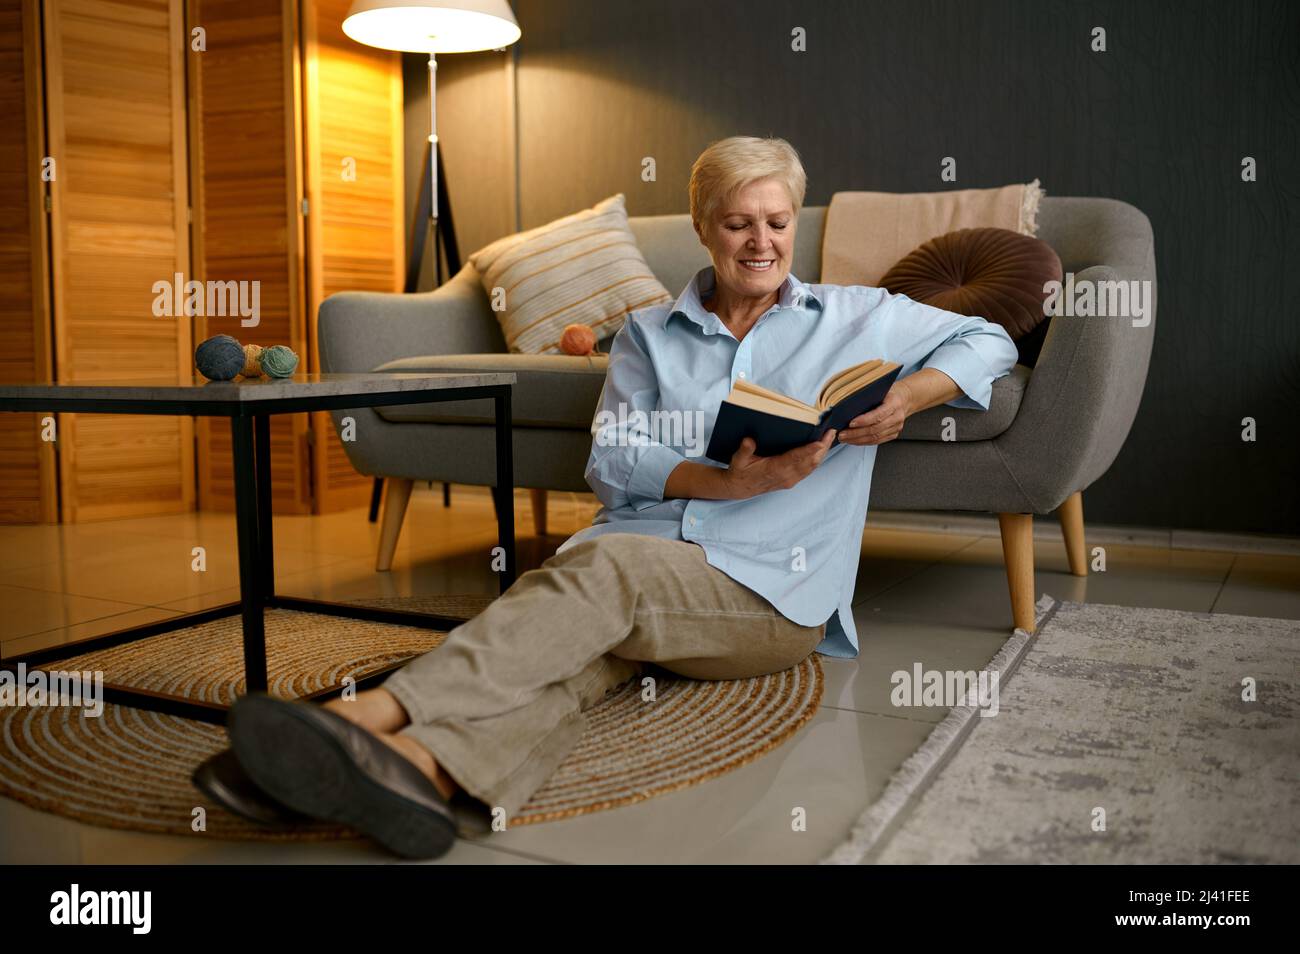 Old woman reading book sitting on sofa Stock Photo